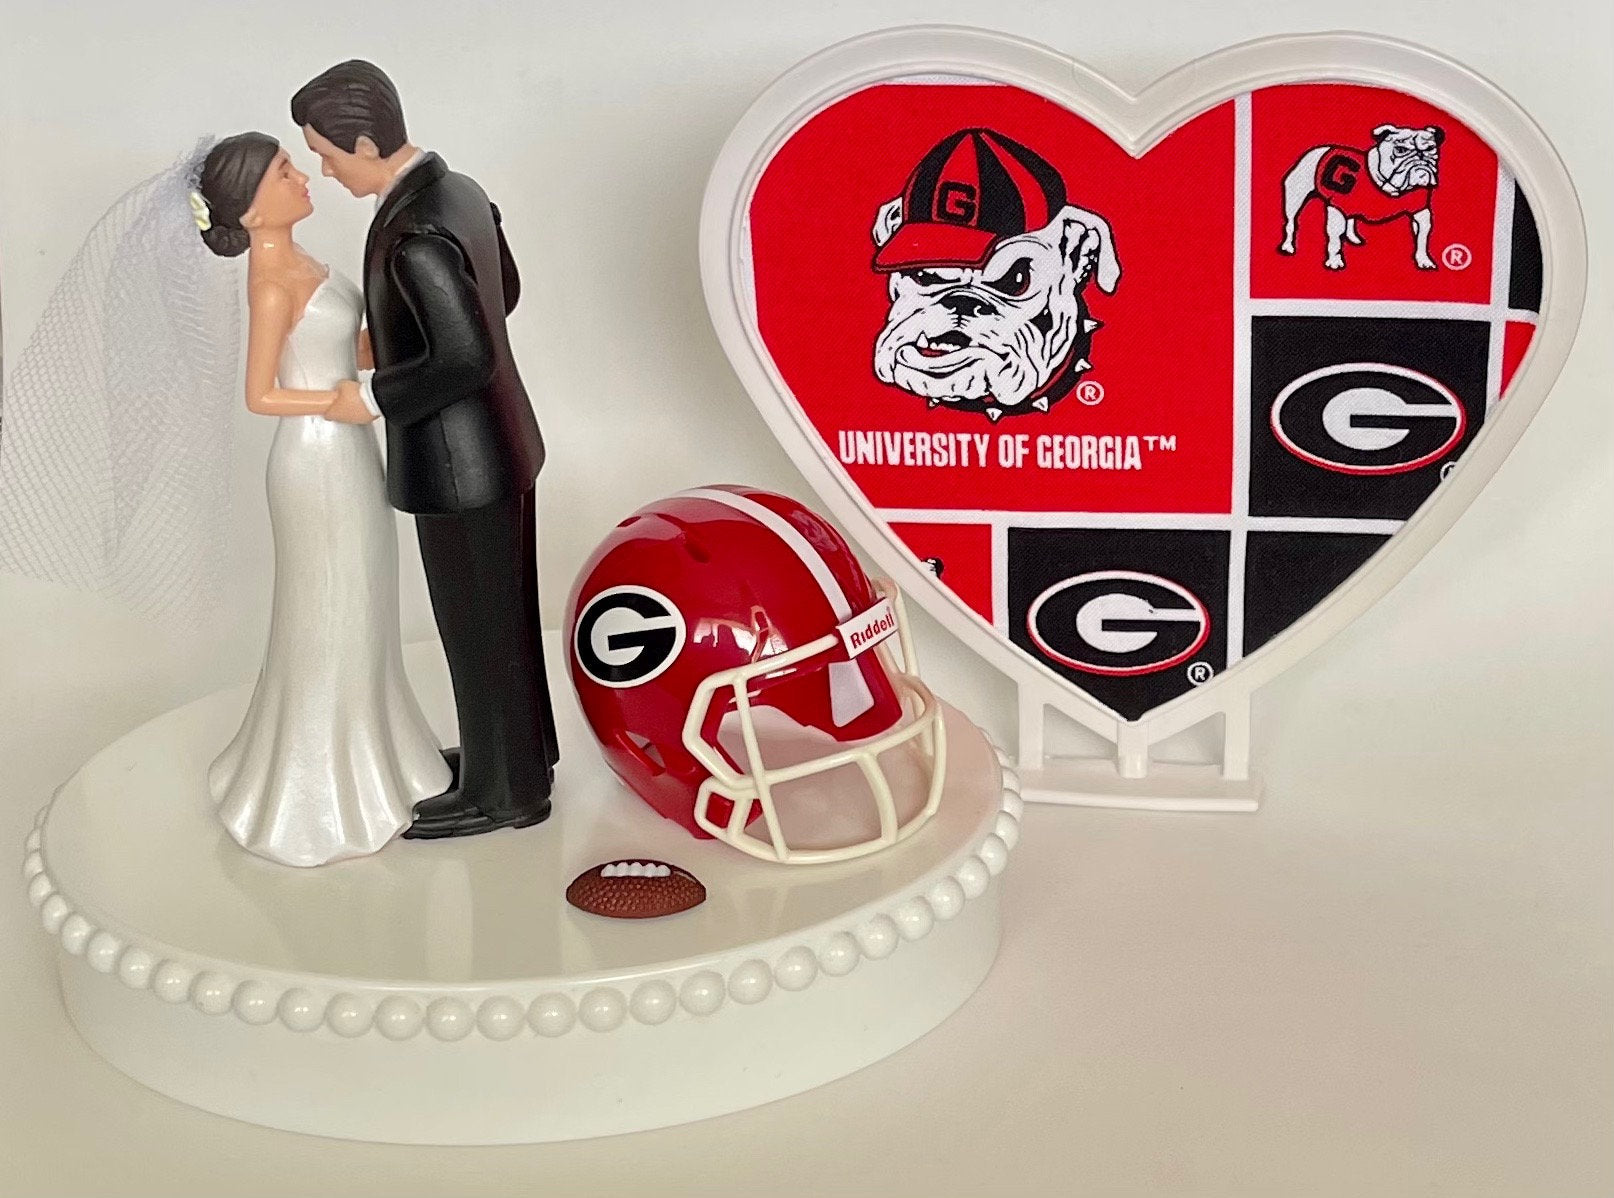 Wedding Cake Topper Georgia Bulldogs Football Themed Beautiful Short-Haired Bride and Groom One-of-a-Kind Sports Fan Cake Top Shower Gift